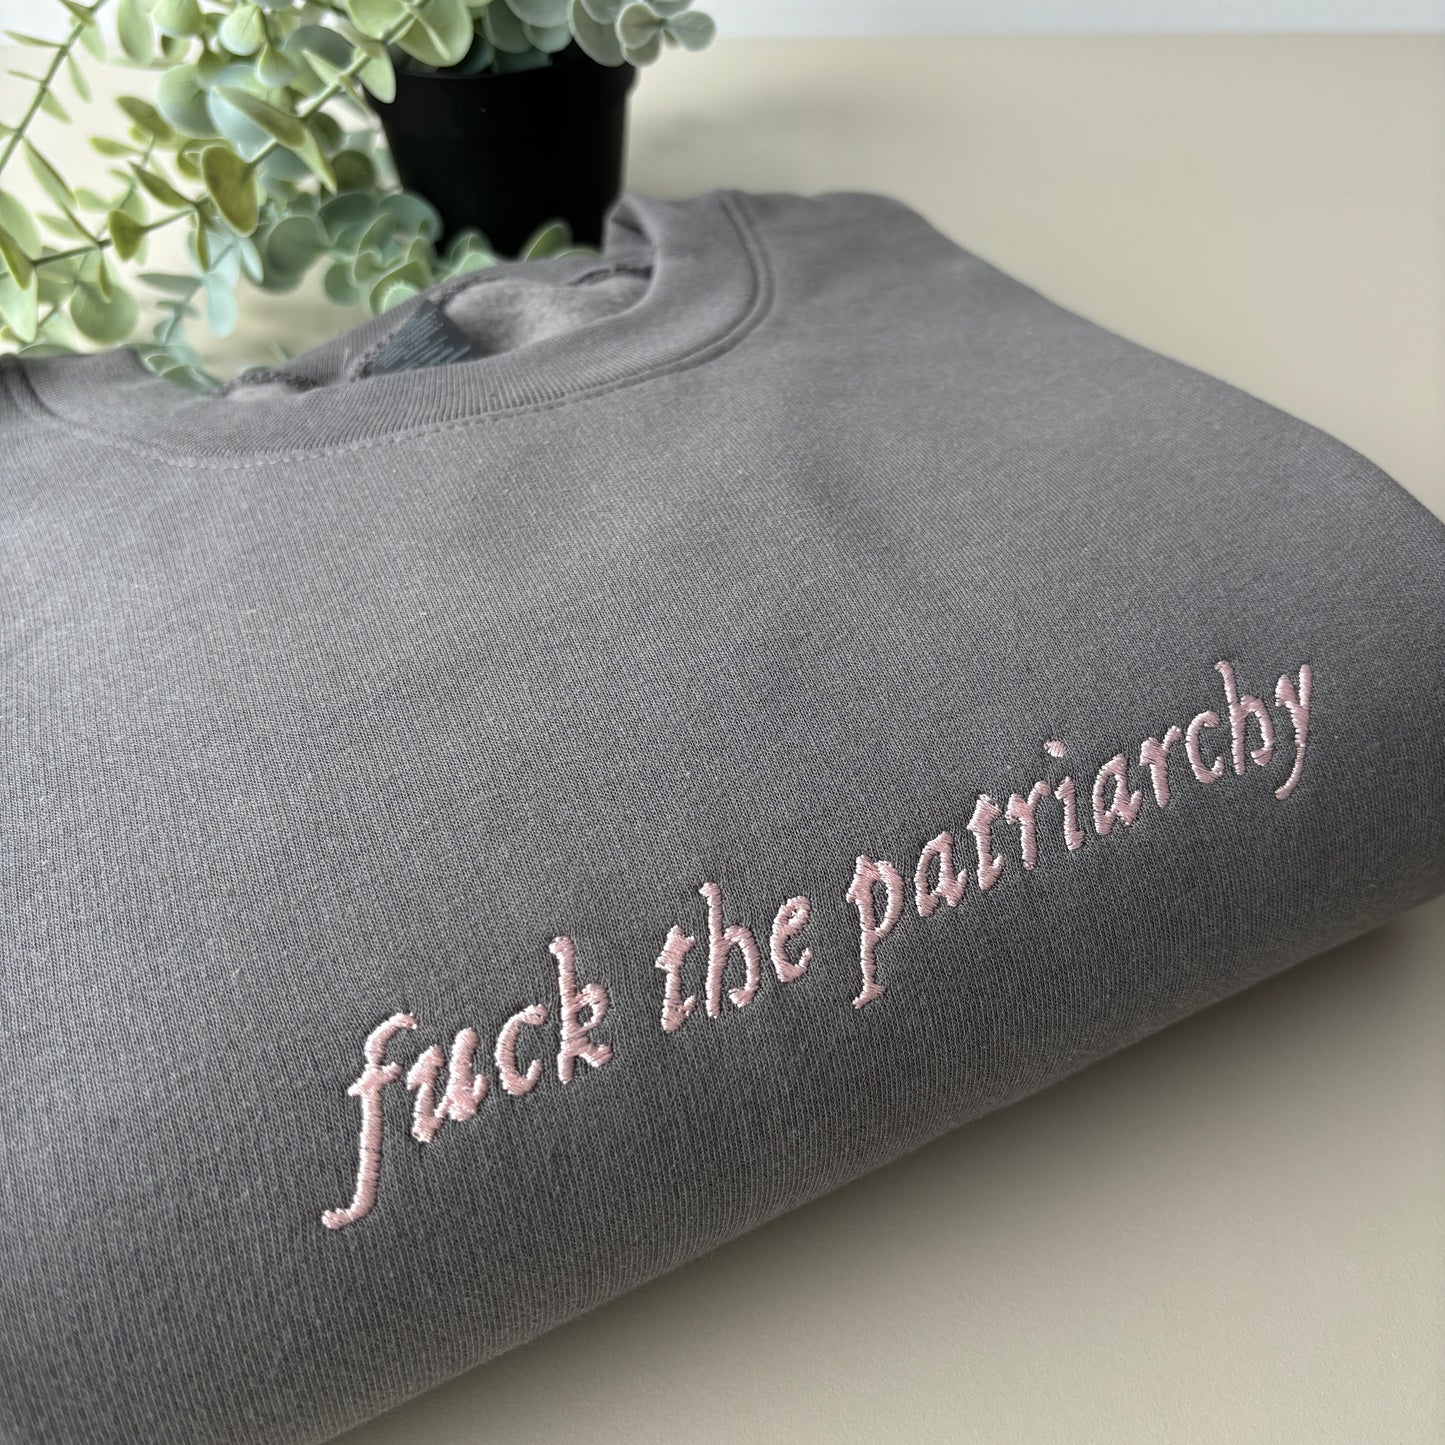 F THE PATRIARCHY EMBROIDERED SWEATSHIRT